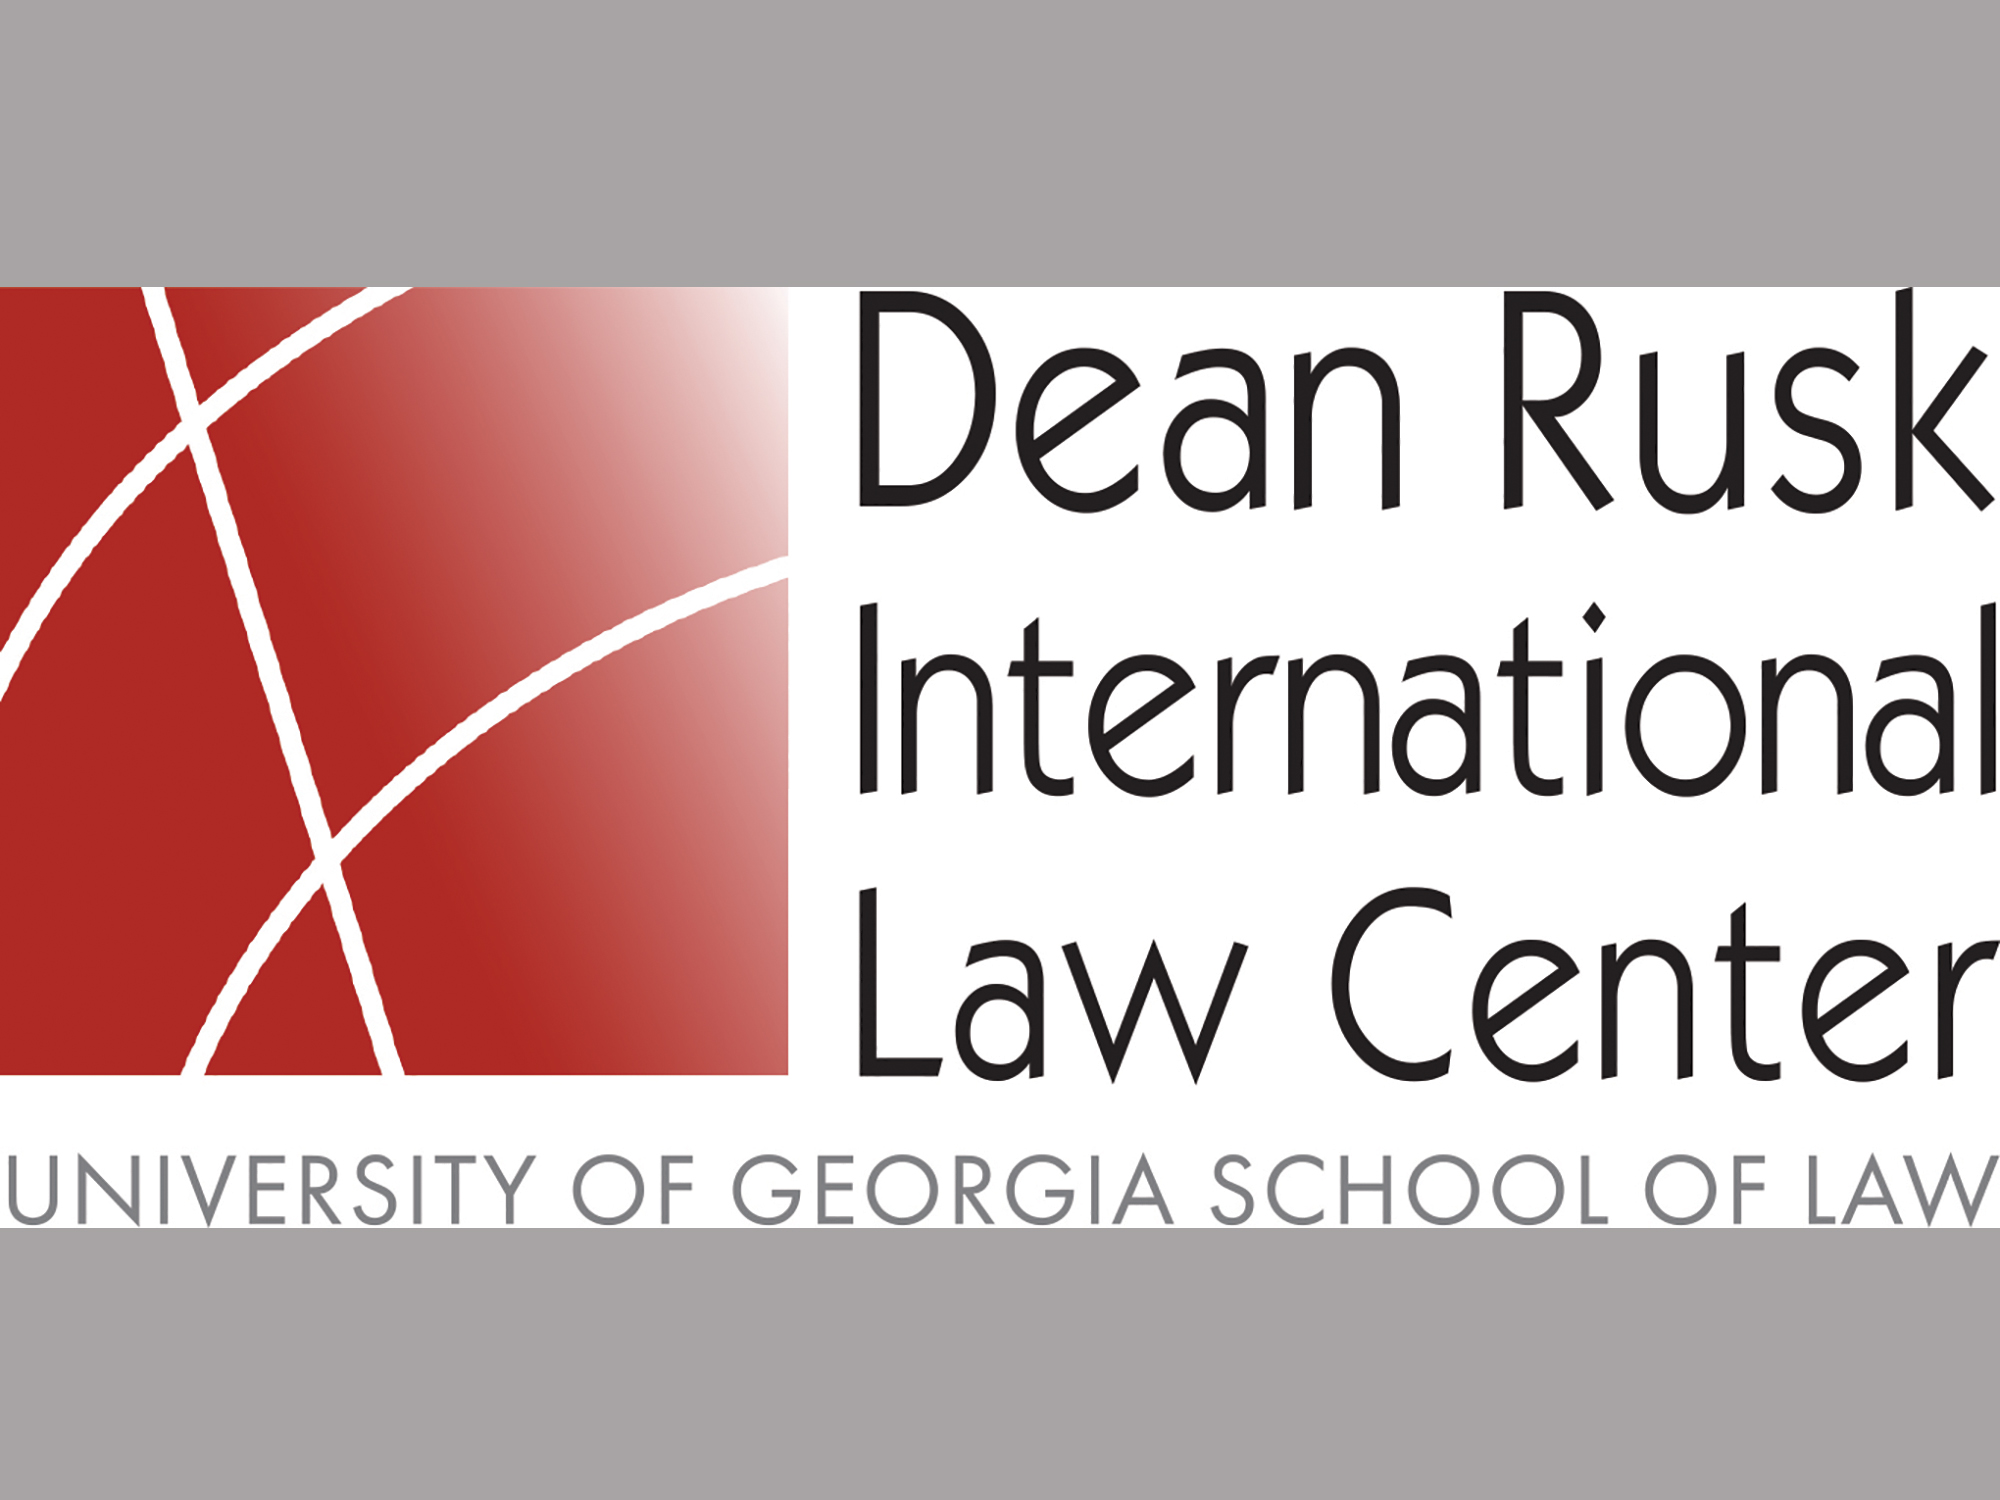 Rusk Center at 45: A leader in international law